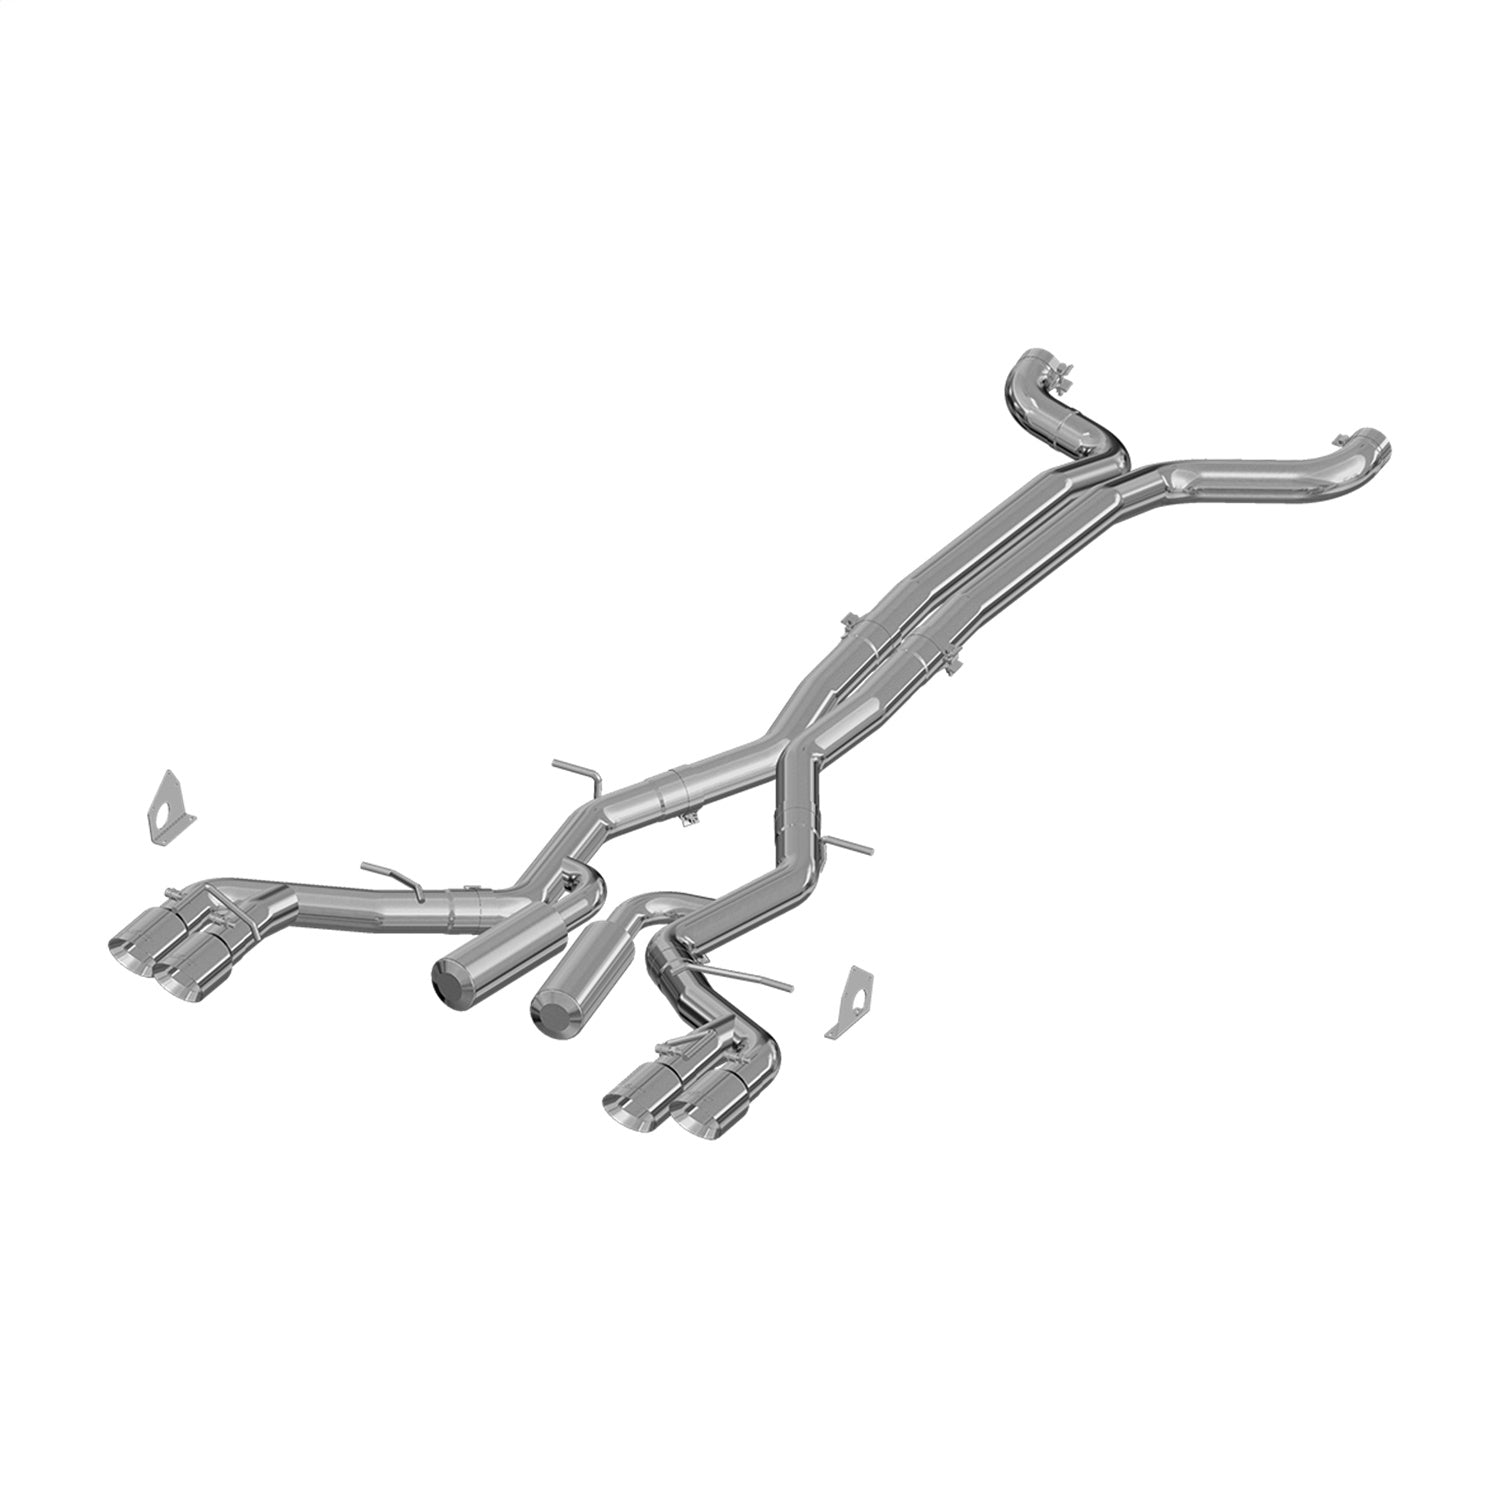 MBRP S7033AL 3 Inch Dual Cat Back Exhaust System Quad Tips Aluminized Steel Race Version For 16-22 Chevrolet Camaro, V8 6.2L 6 Speed Coupe Only 17-22 Chevrolet Camaro ZL1- Coupe Only MBRP - Truck Part Superstore